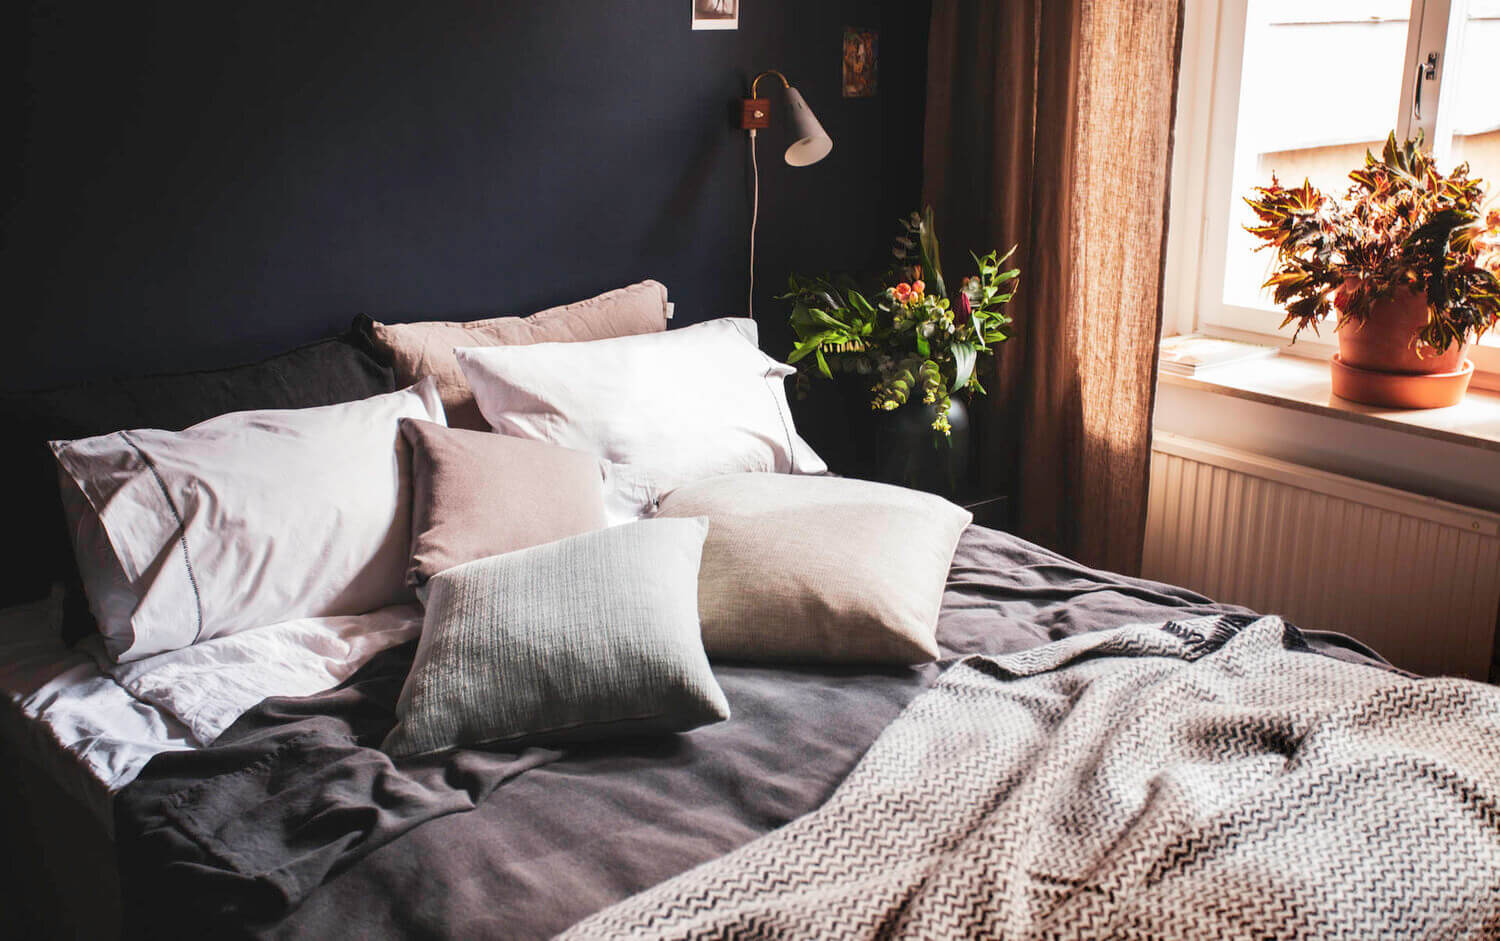 AWarmScandiApartmentwithaMoodyBedroom TheNordroom12 A Warm Scandinavian Apartment with a Moody Bedroom